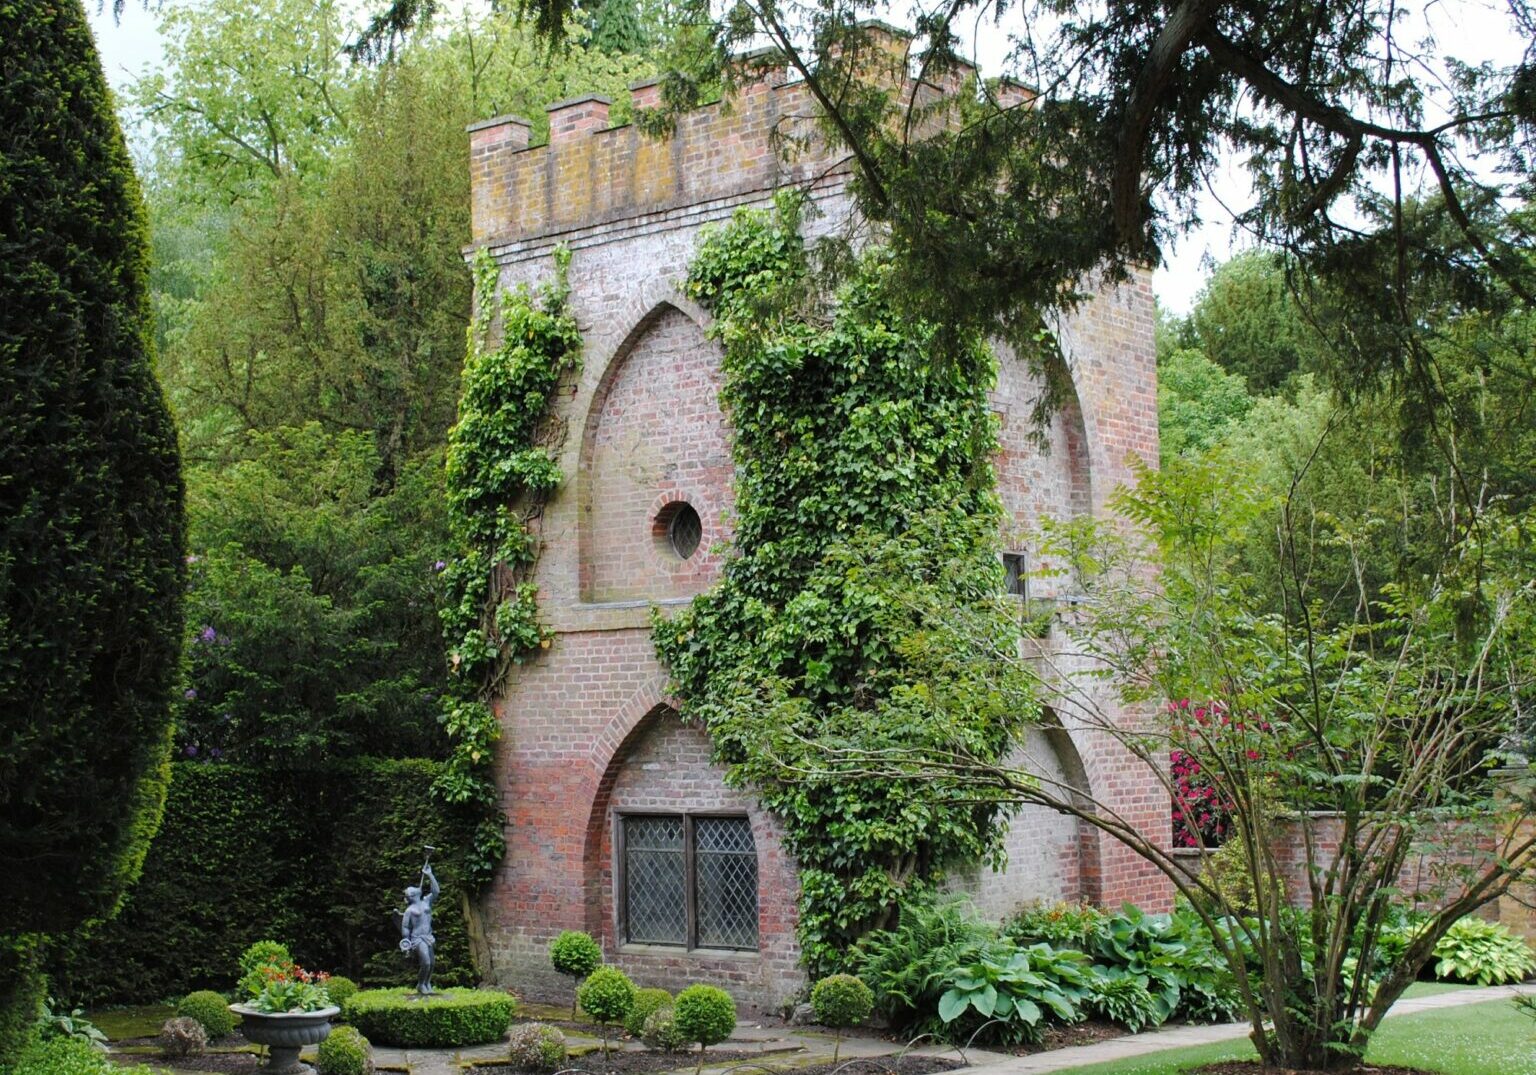 And old folly tower in a garden